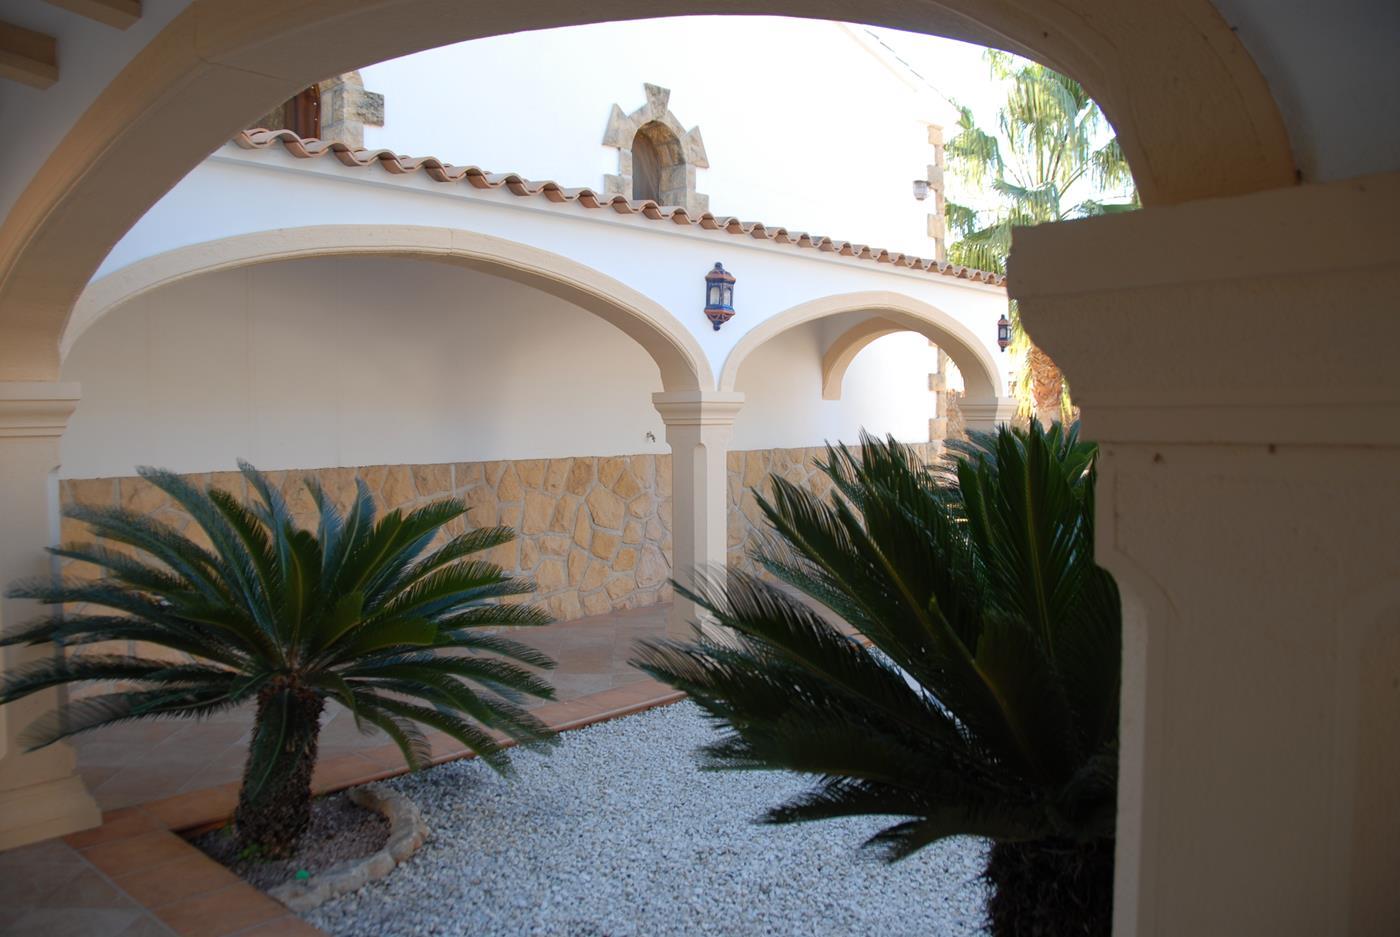 Villa for 10 people 200 meters from the beach of La Fustera, winter rental